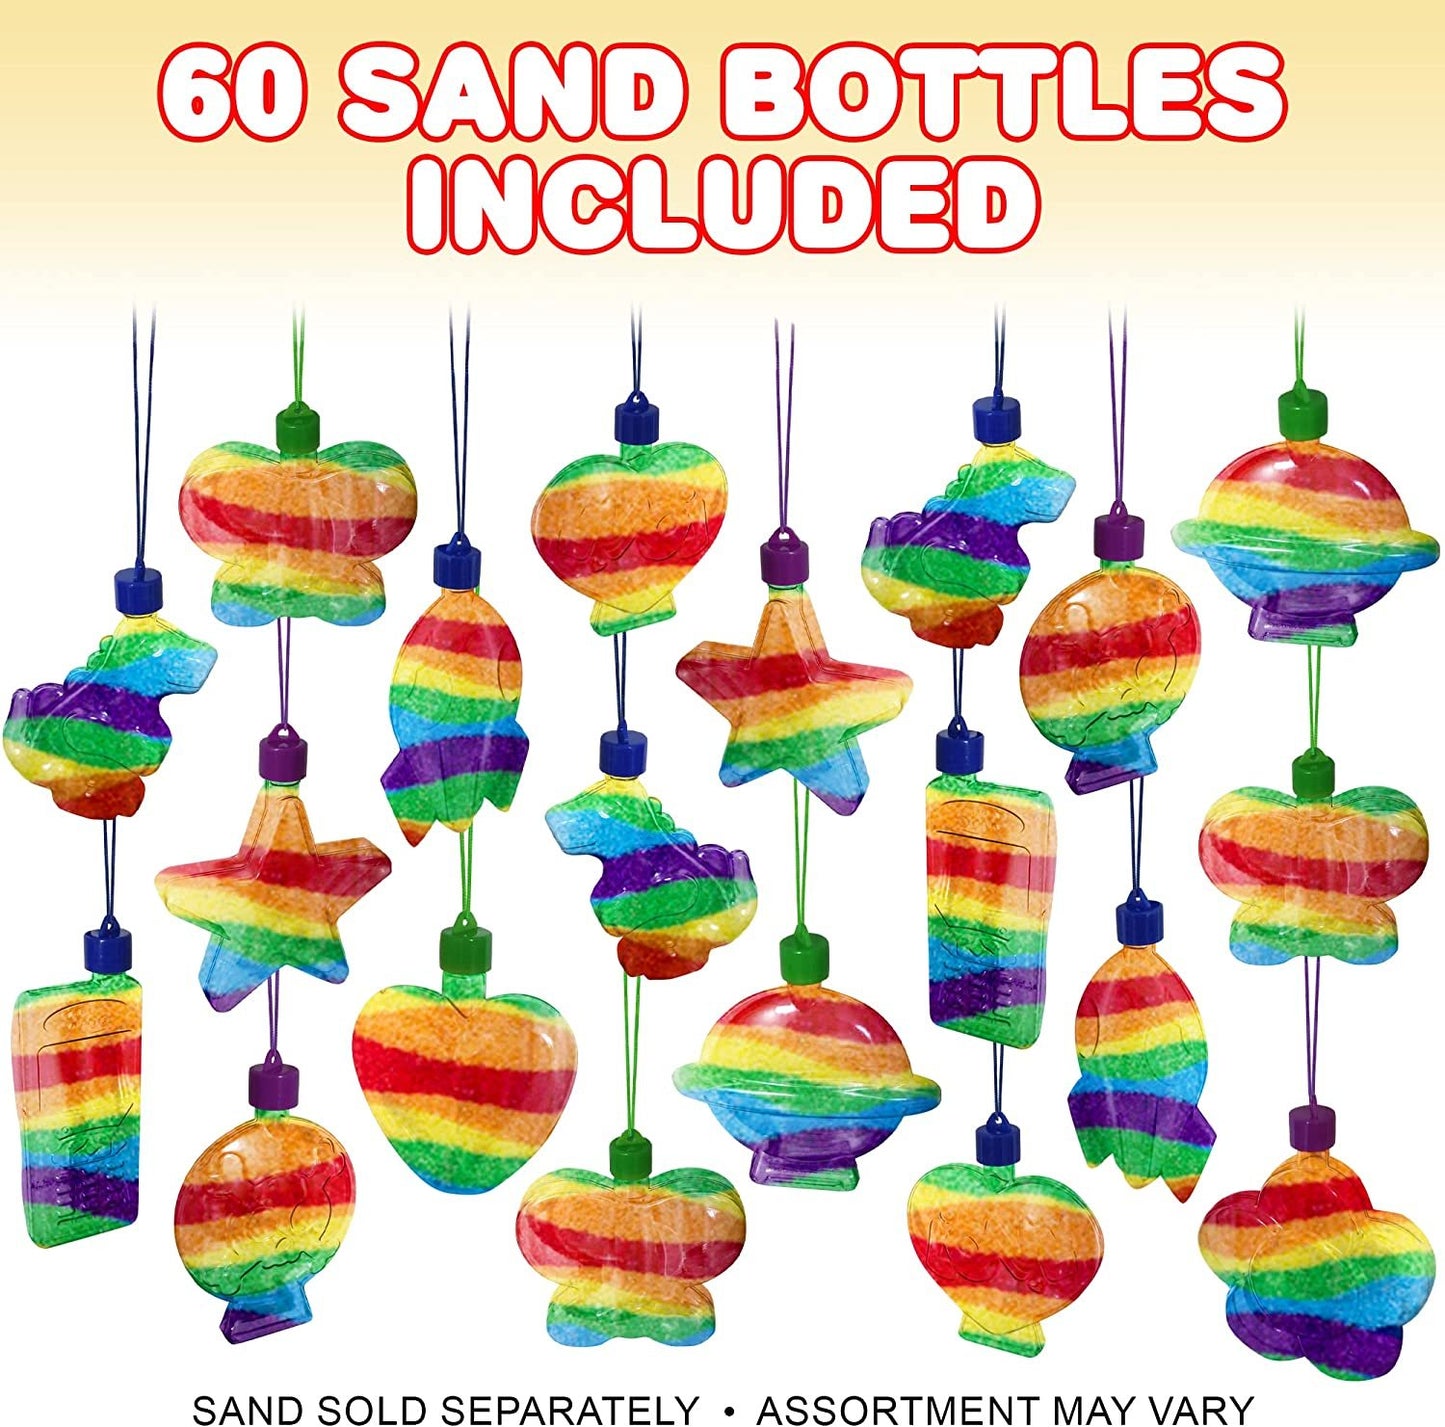 ArtCreativity Sand Art Bottle Necklaces Assortment for Kids, Bulk Pack of 60, Collection of Sand Art Craft Bottle Necklaces, Fun Party Supplies & Favors for Boys and Girls - Sand Sold Separately